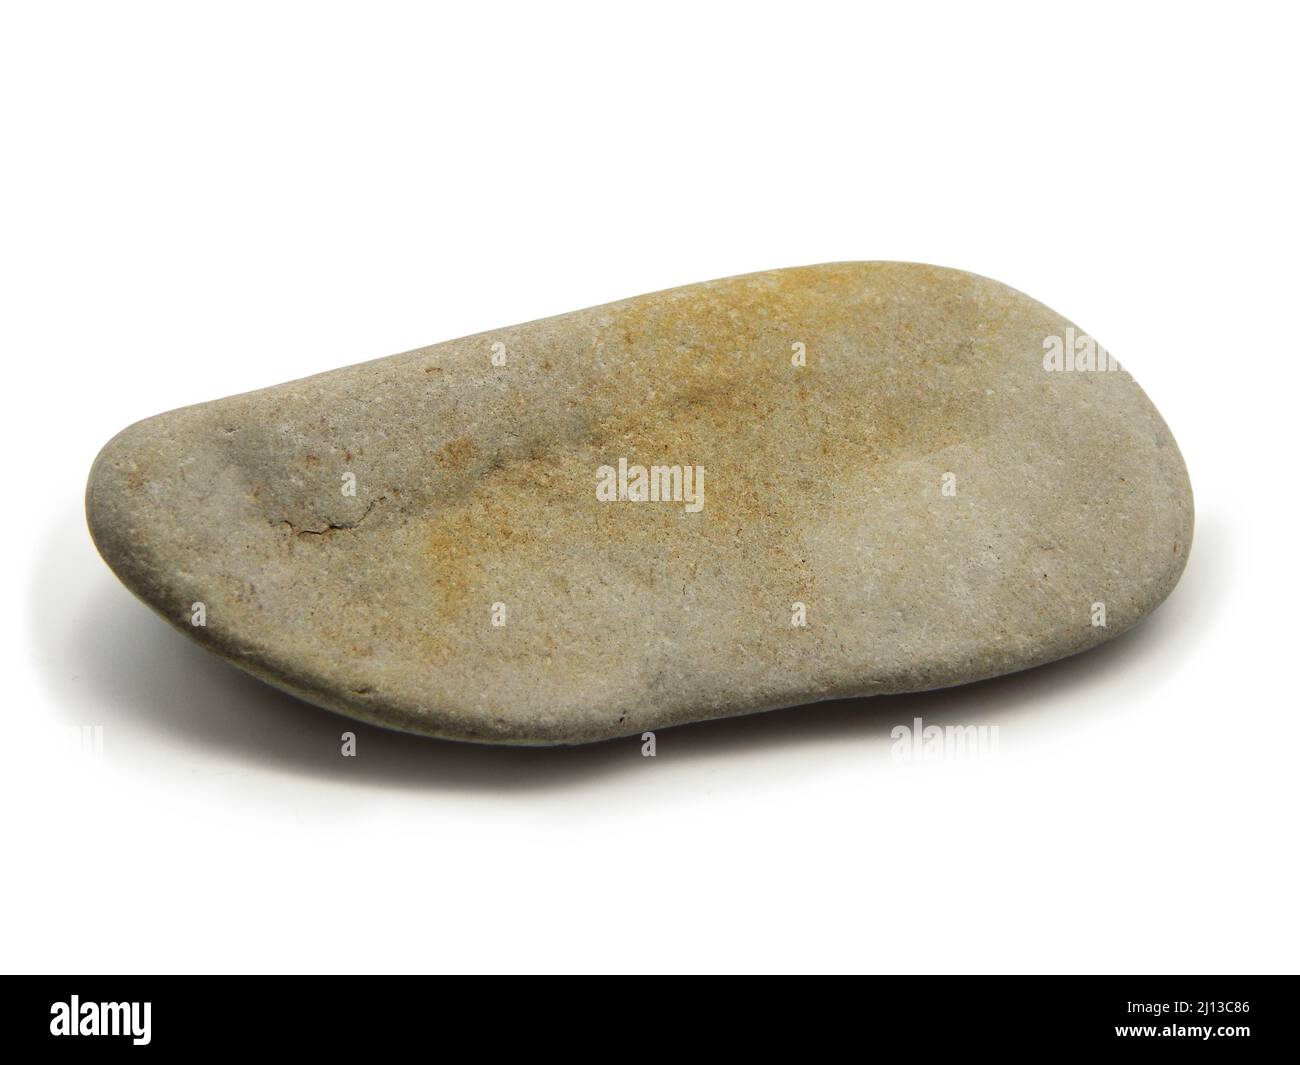 Pebble from the coast. Coast of the Caspian Sea. Close-up. Isolated on white background. Stock Photo